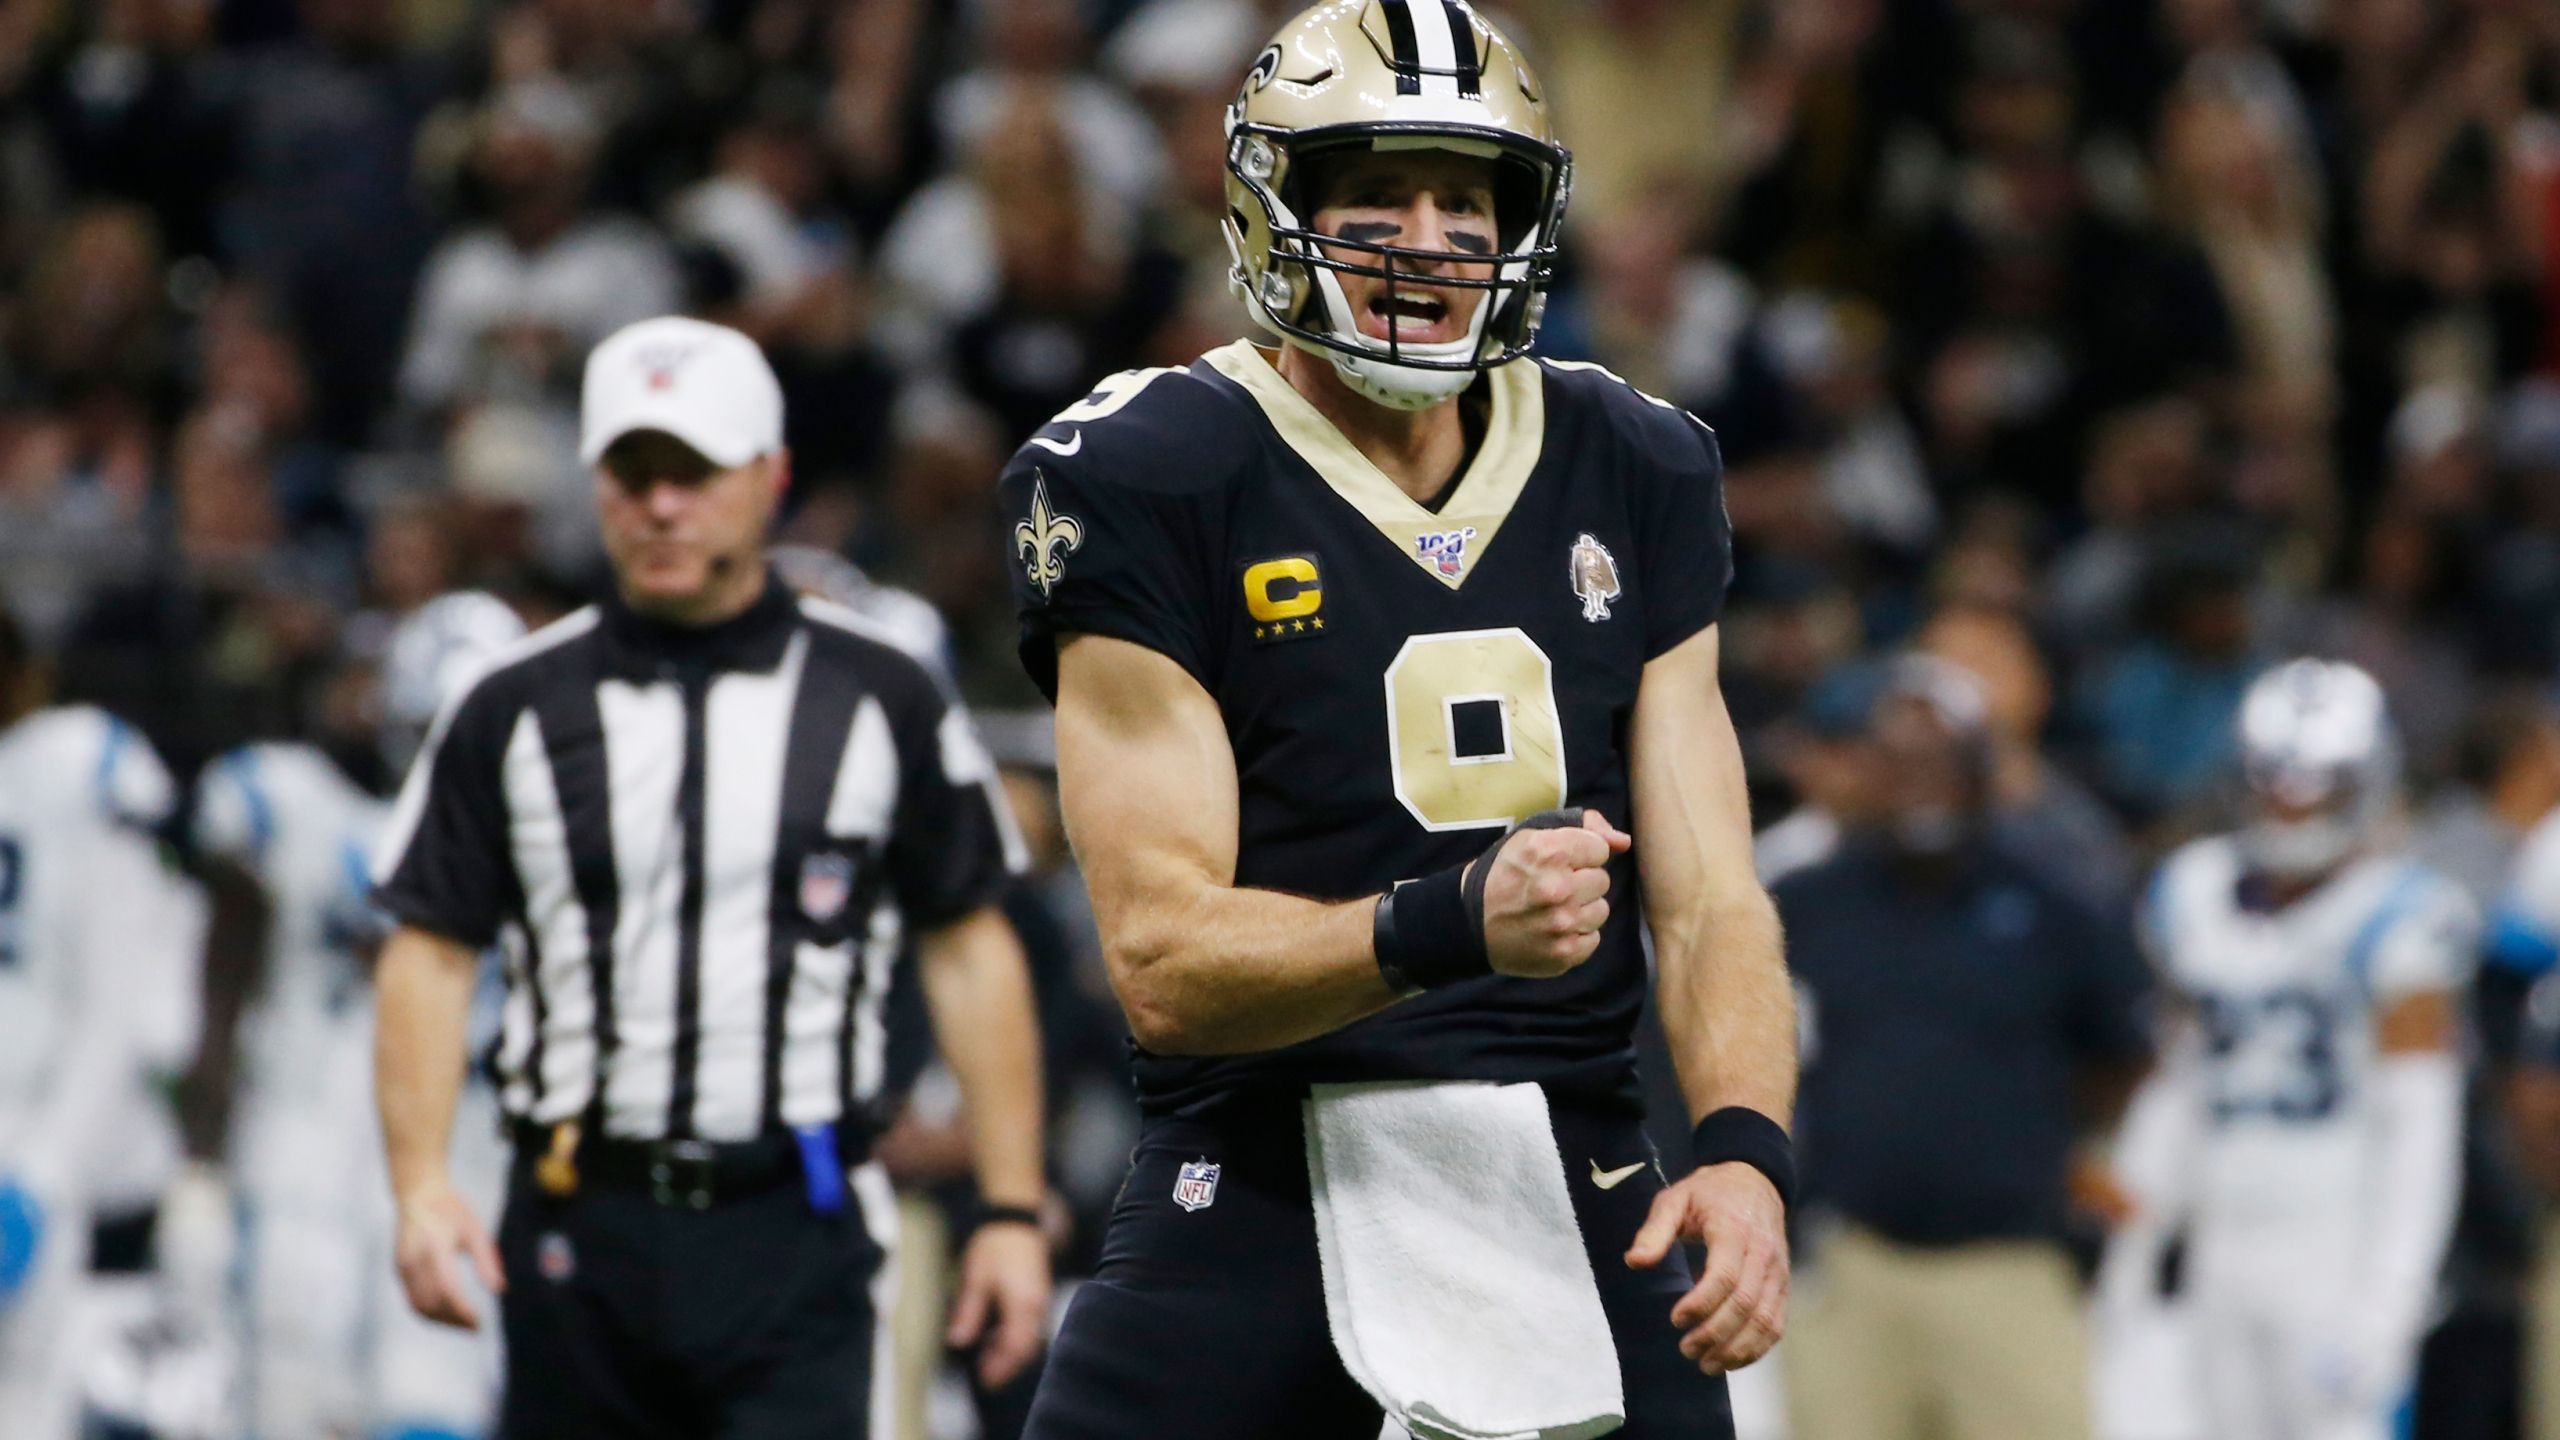 Saints QB Brees chasing NFL history again in prime time. KRQE News 13